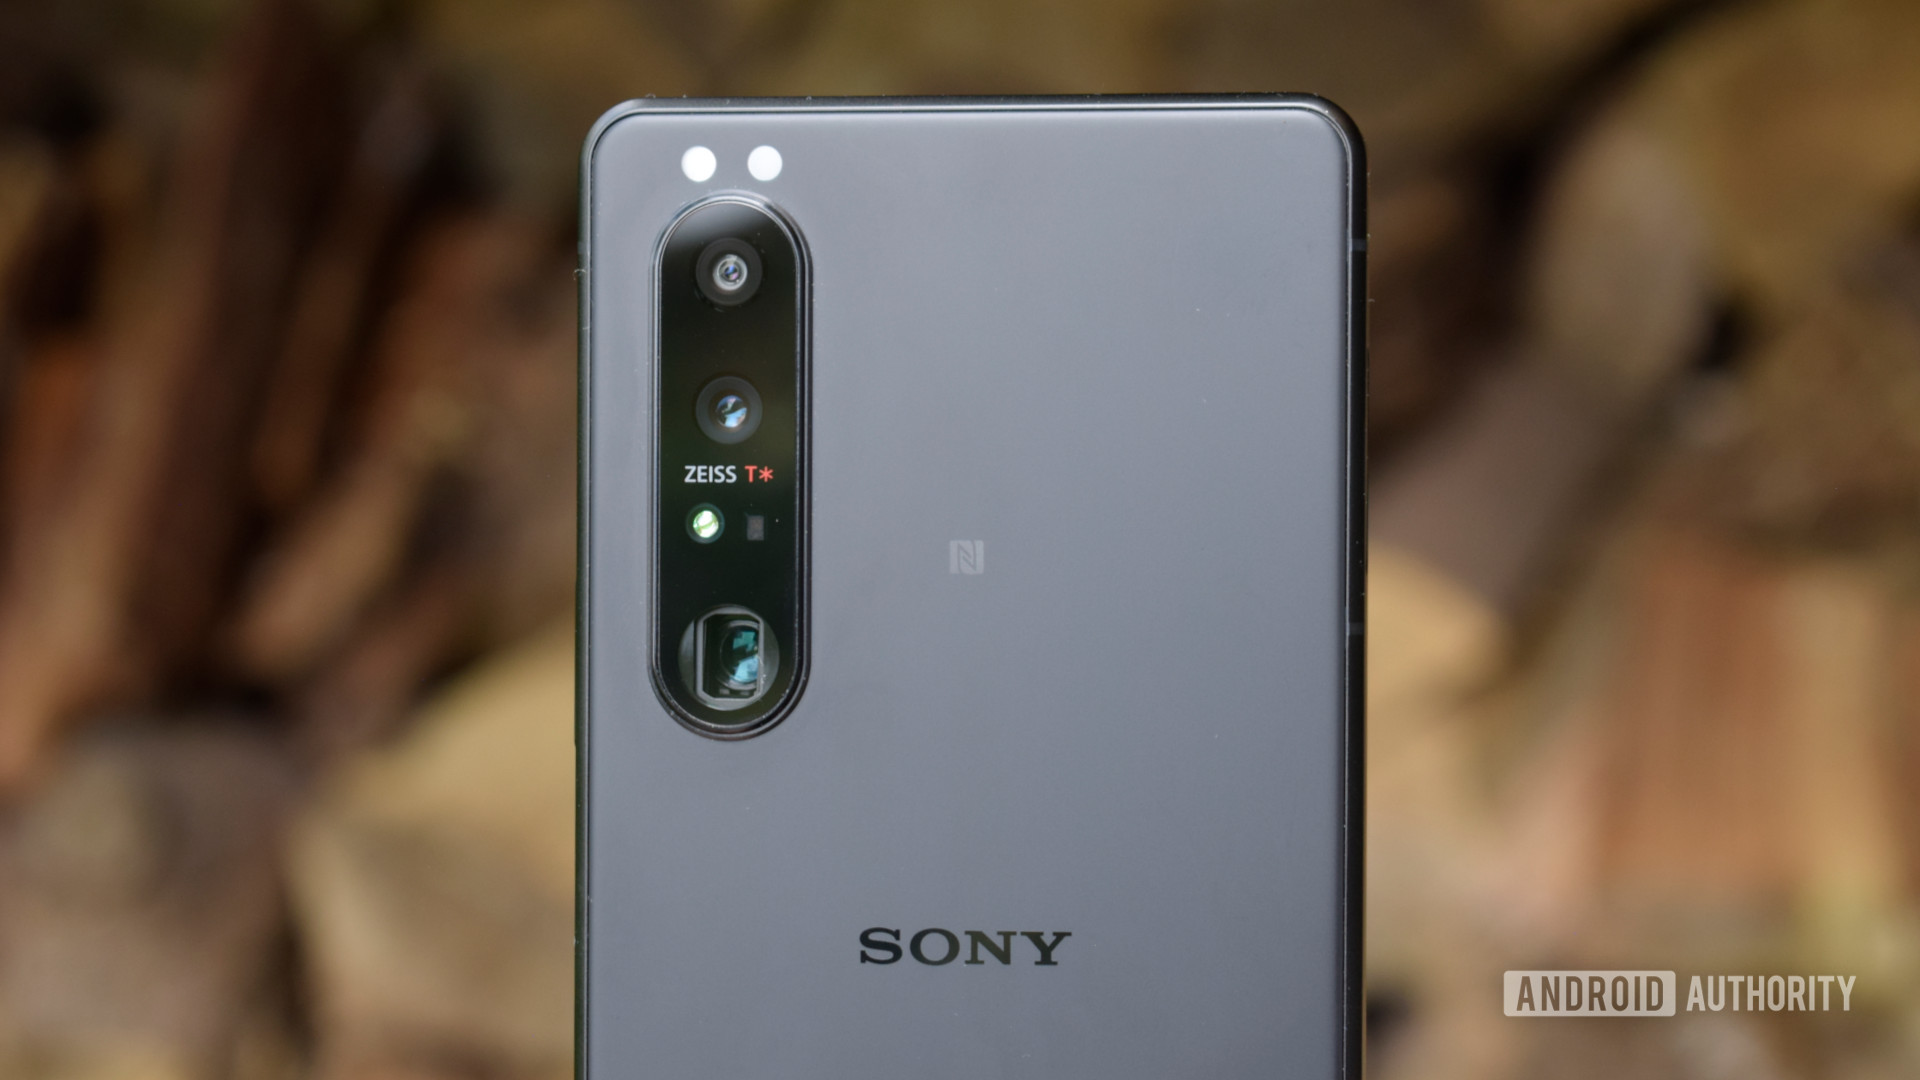 The Sony Xperia 1 III rear view with camera module.